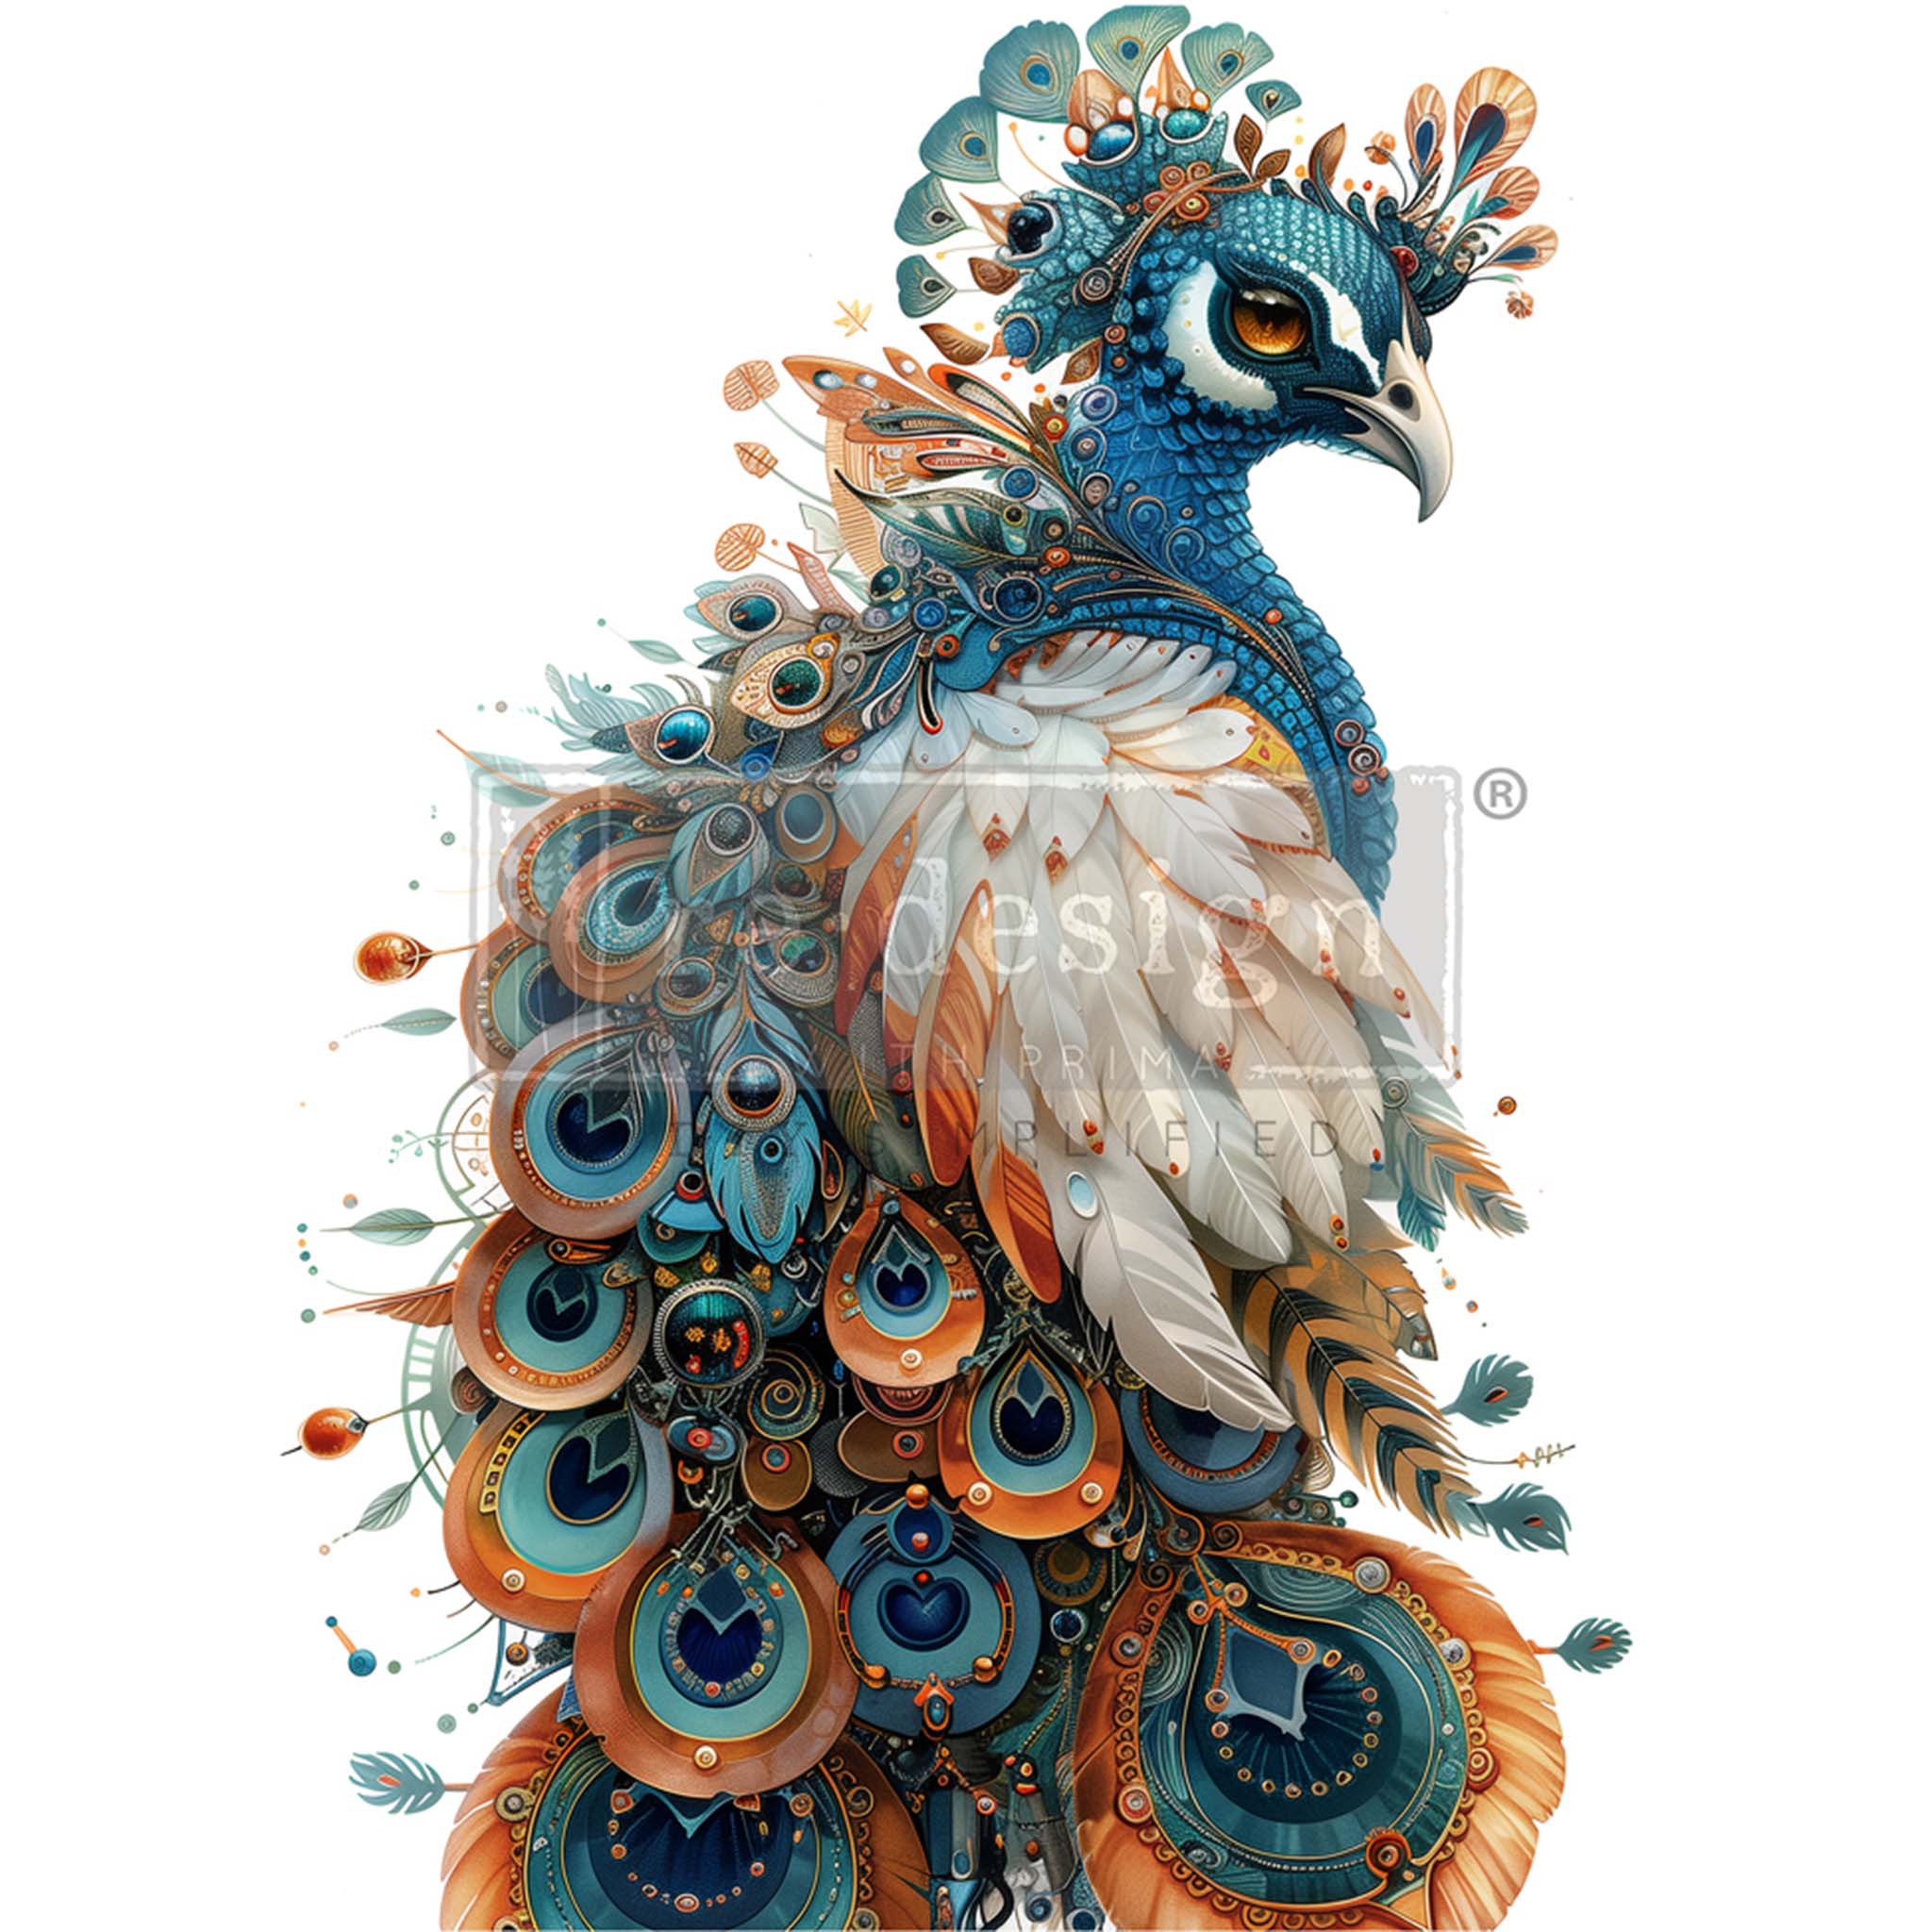 A1 fiber paper design featuring a steampunk inspired majestic peacock with boldly colored feathers. 